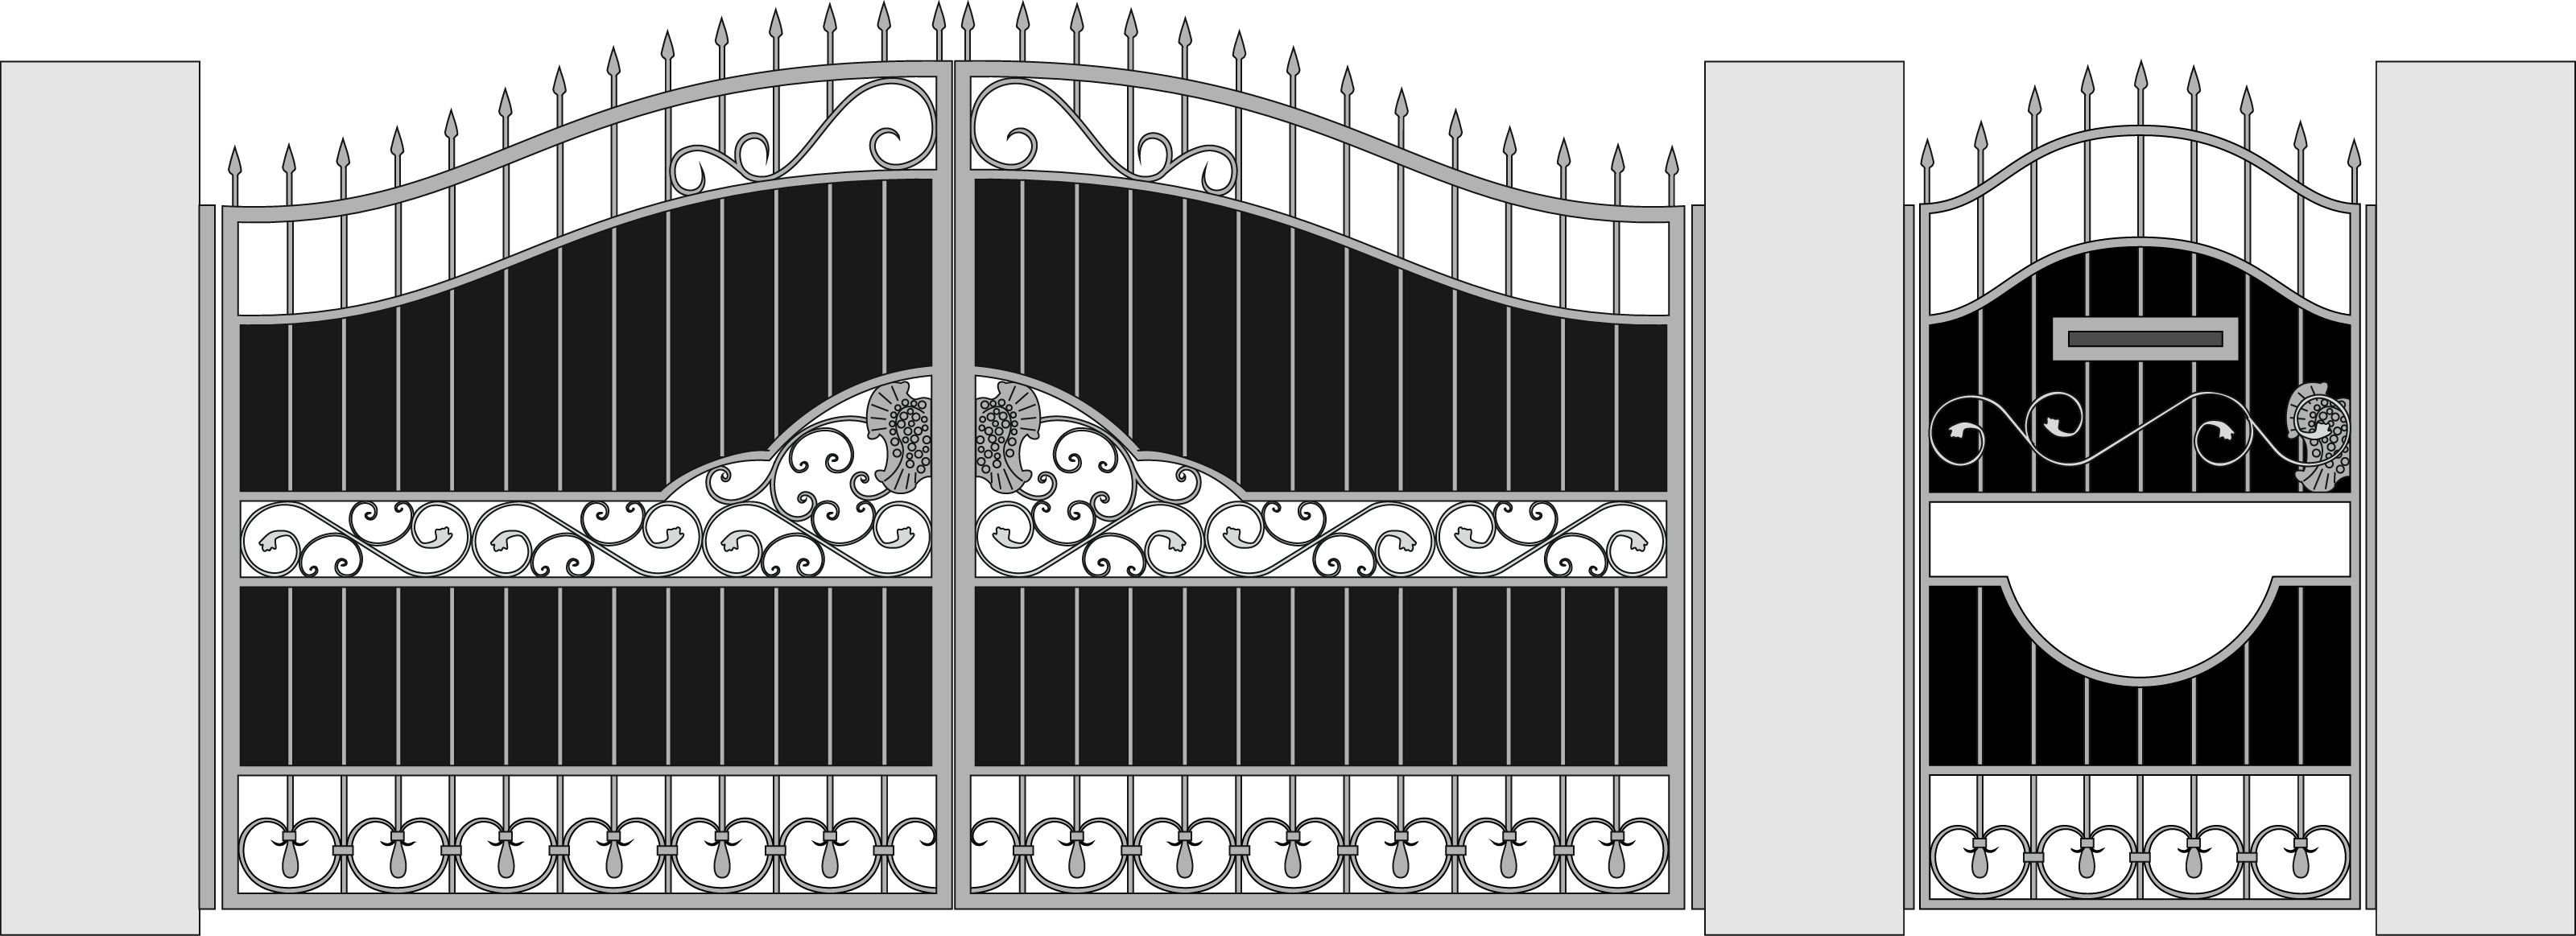 Forging Wicket gate Door Fence - Vector cell gate map 3200*1163 ...